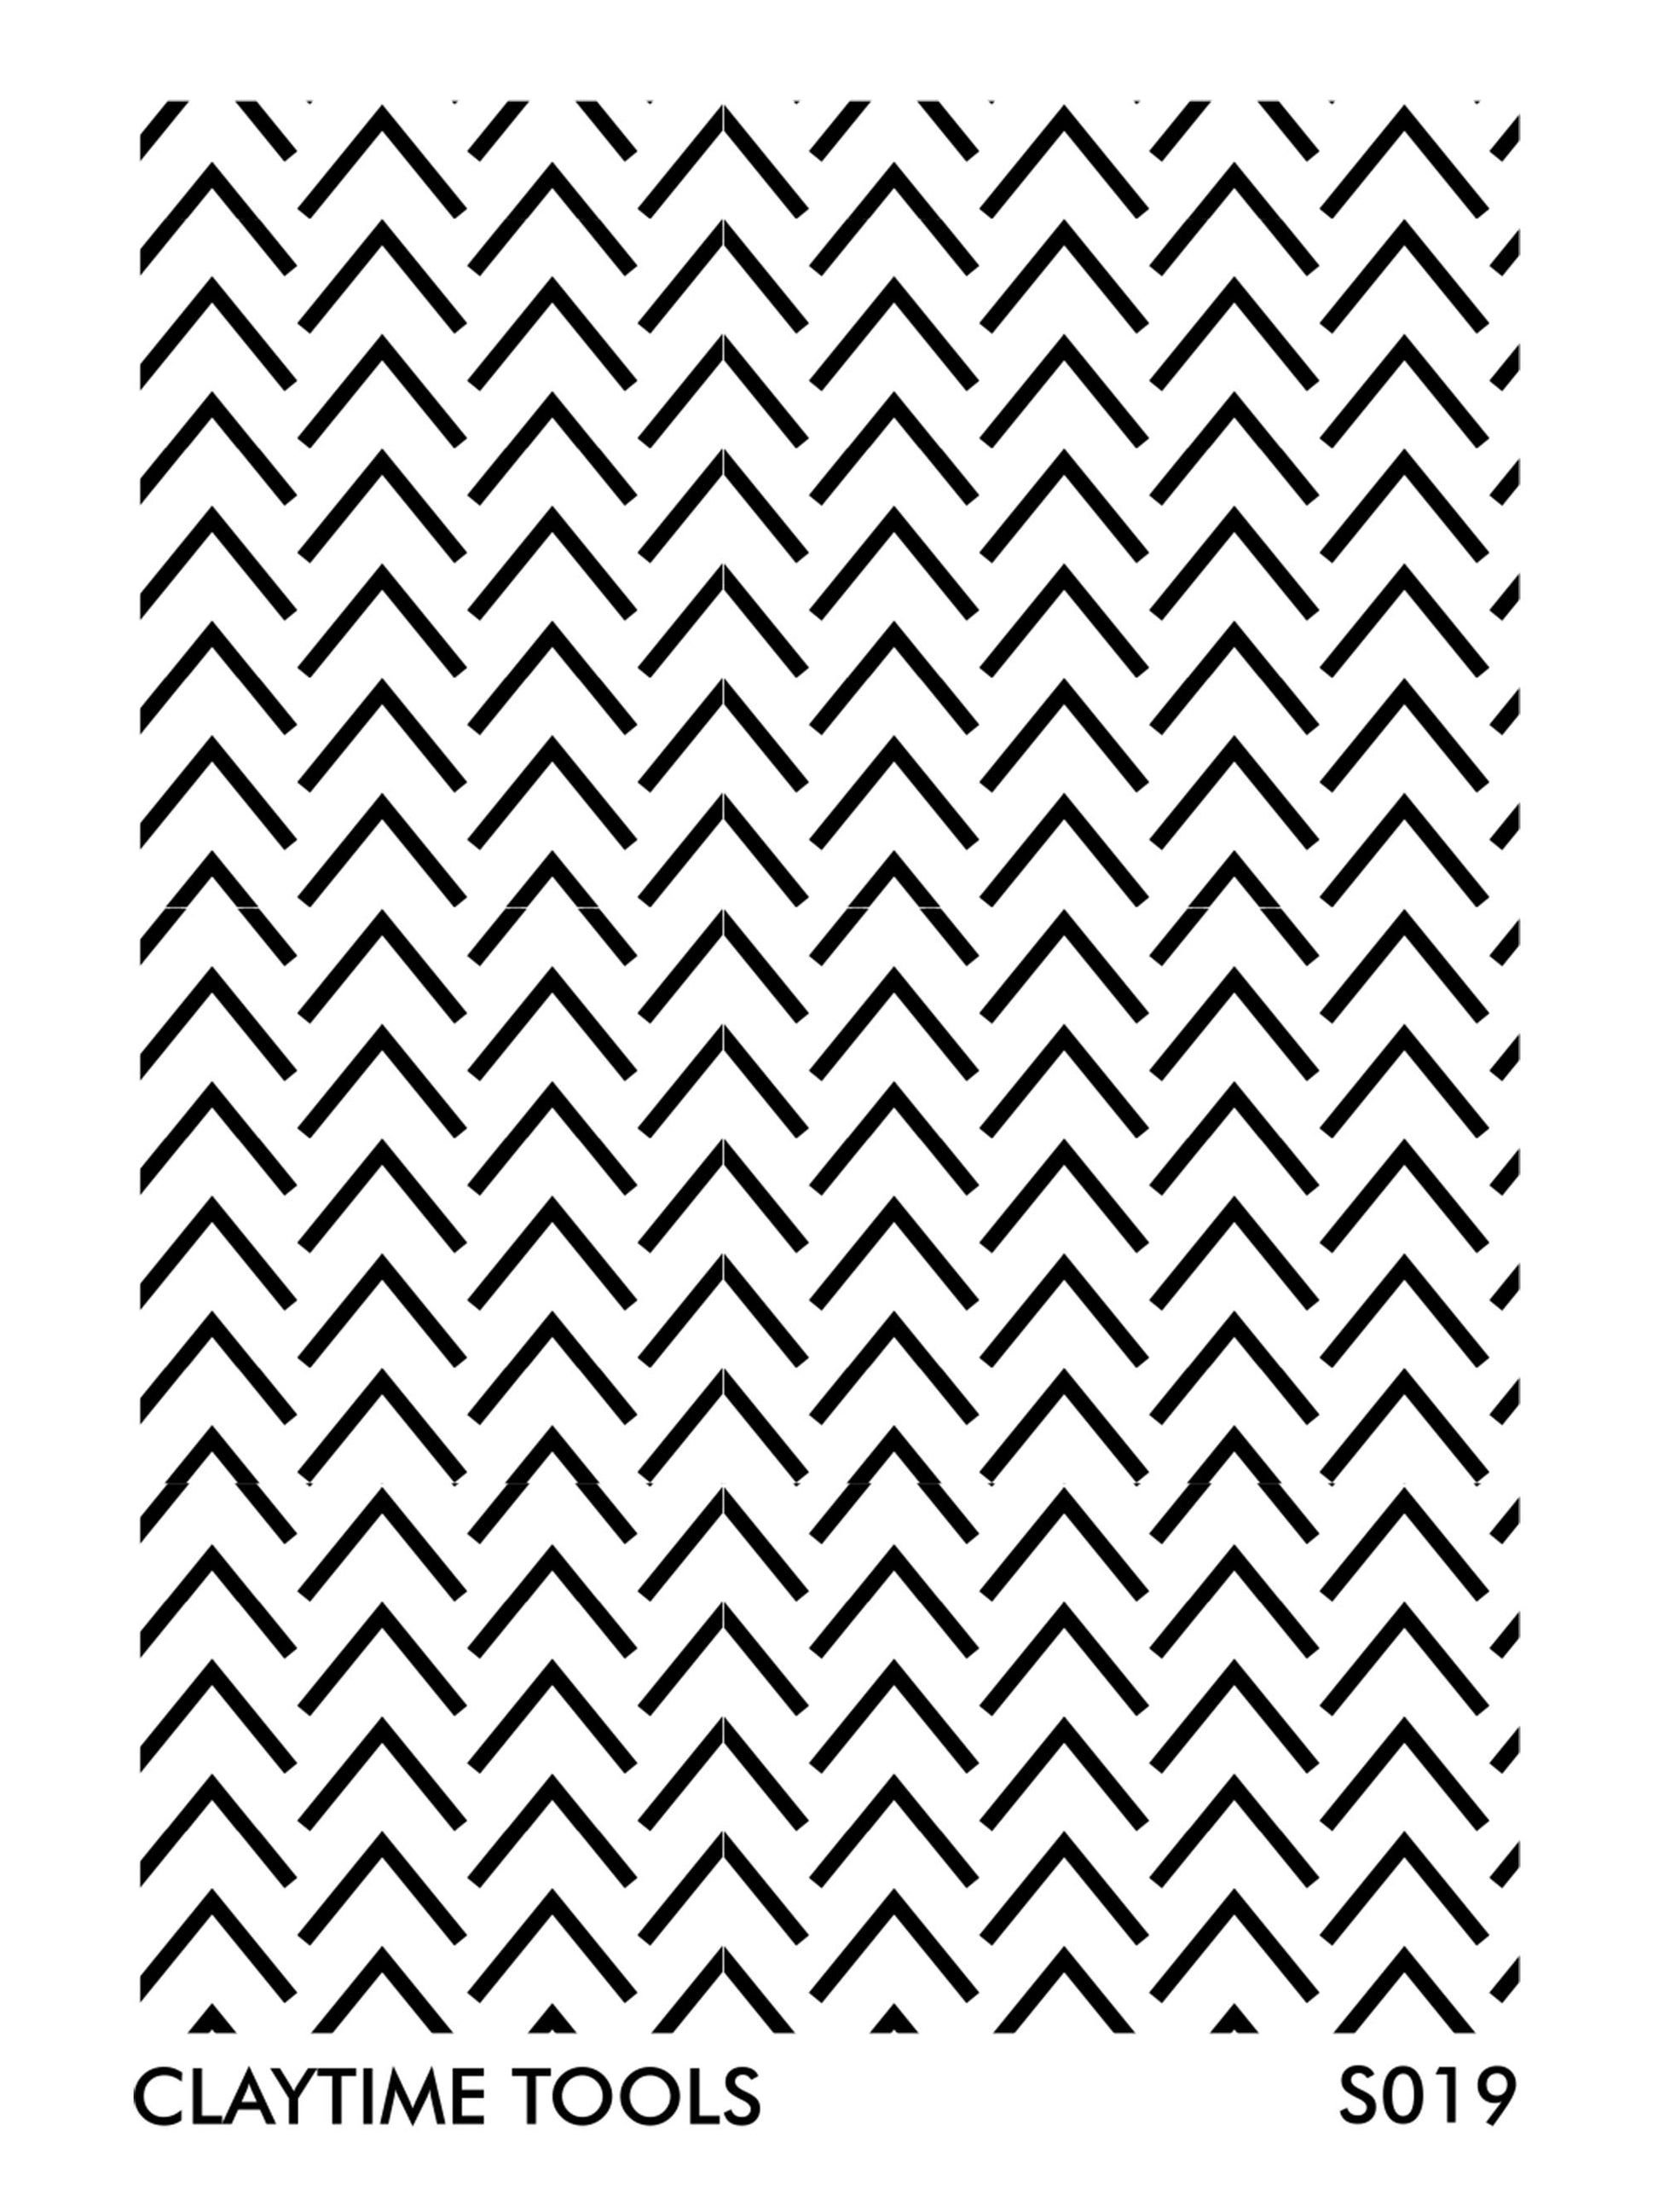 Minimal arrow pattern in a black and white background.